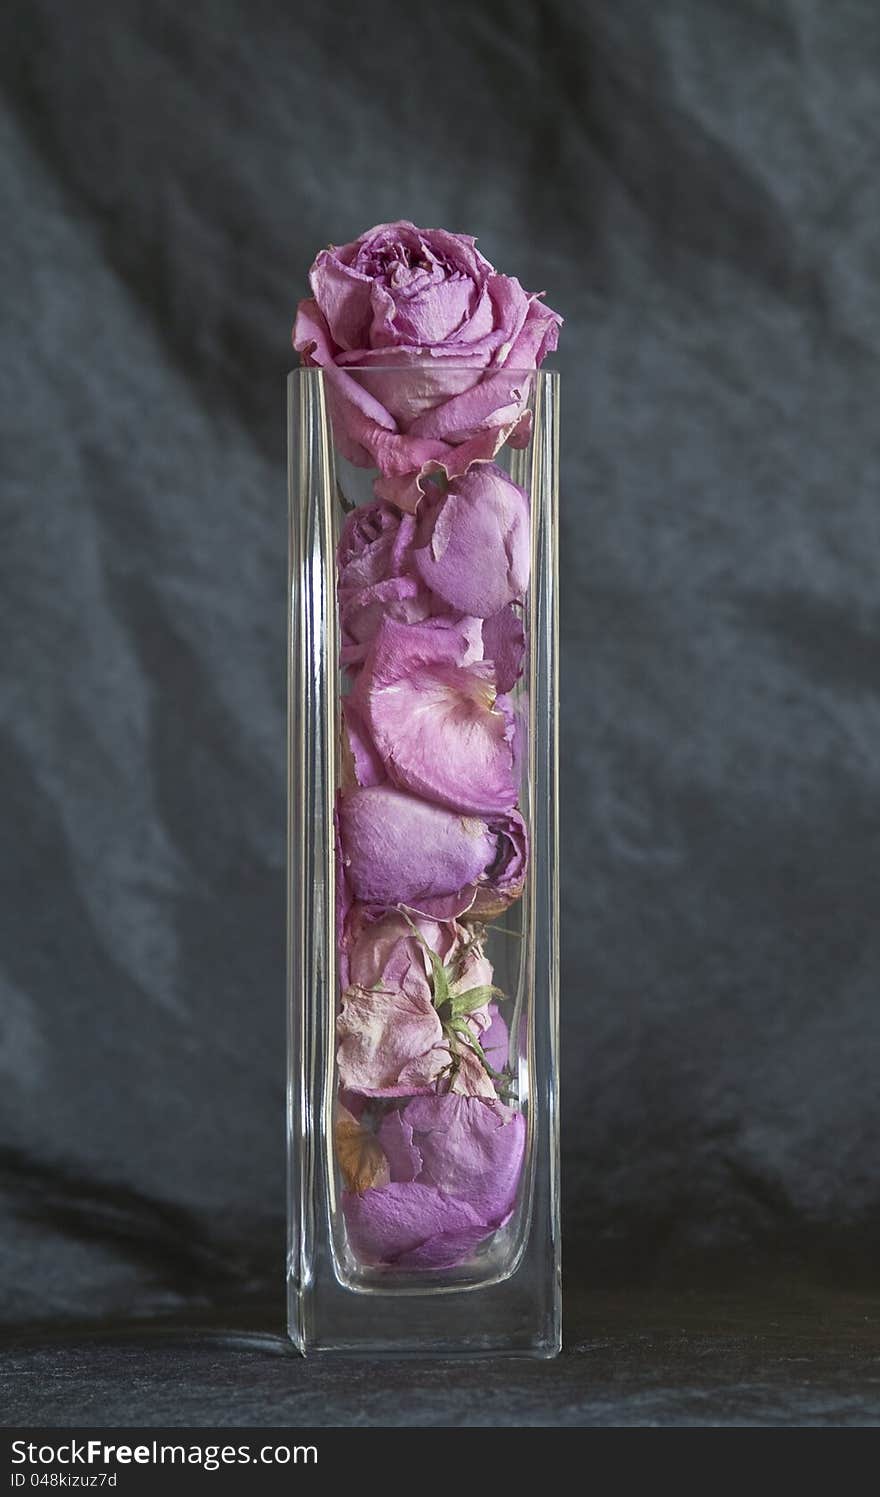 Dried rose bushes in a glass vase on dark background. Dried rose bushes in a glass vase on dark background